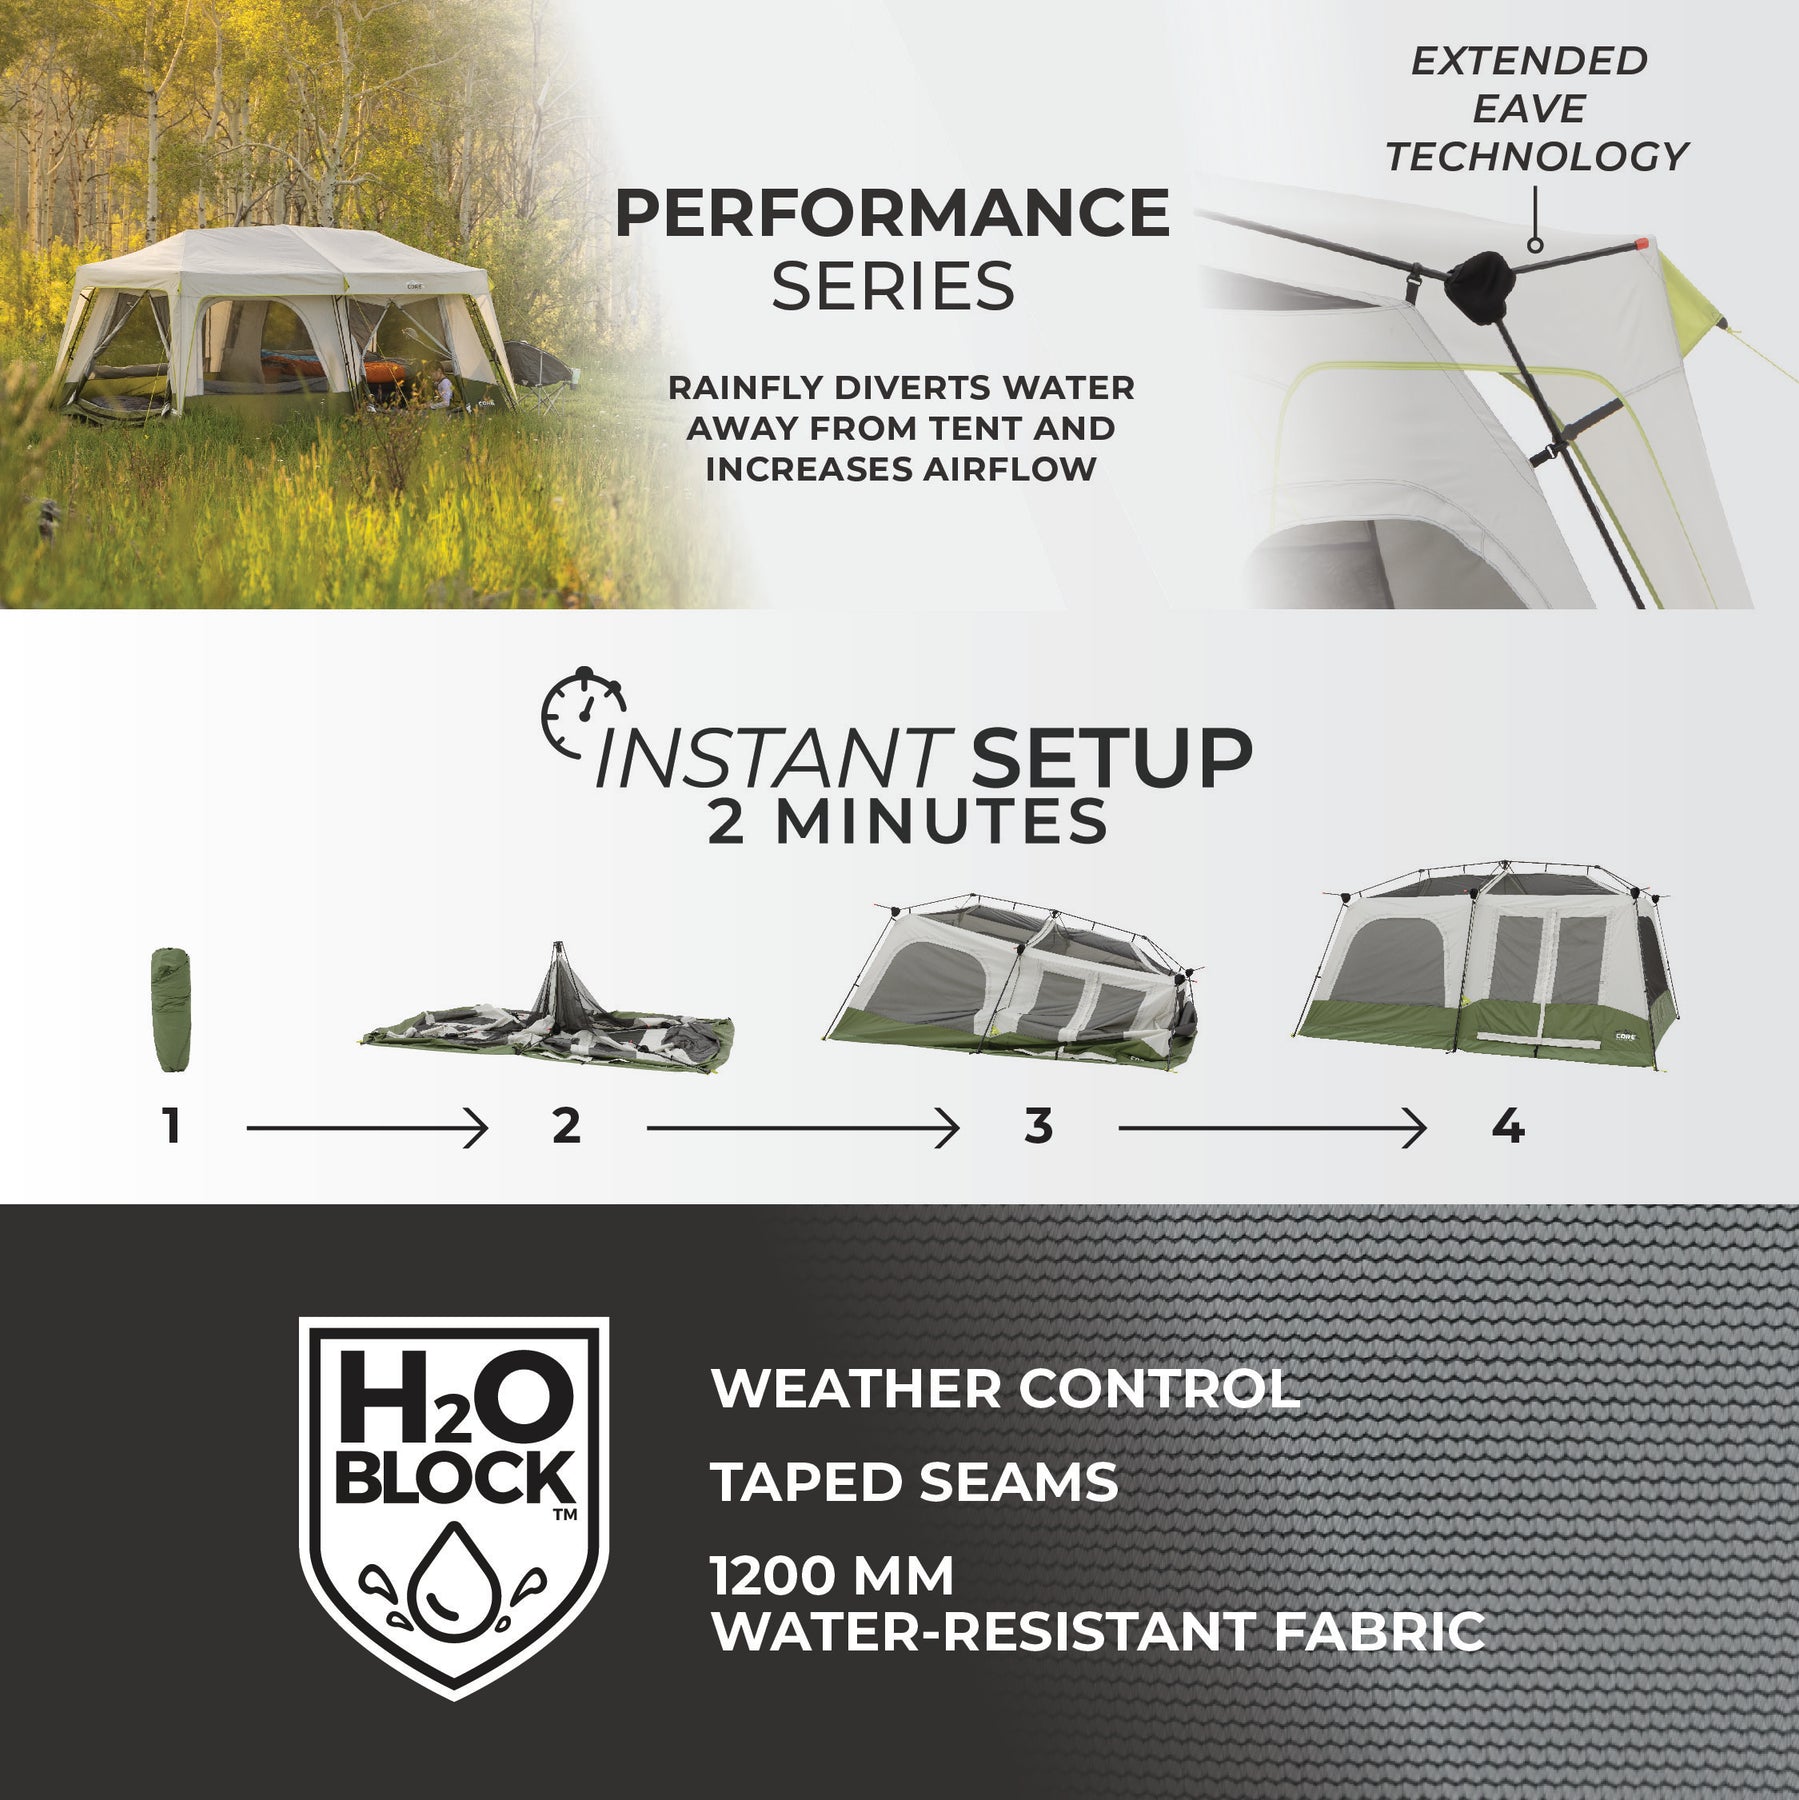 10 Person Instant Cabin Tent with Screen Room 14' x 10' – Core